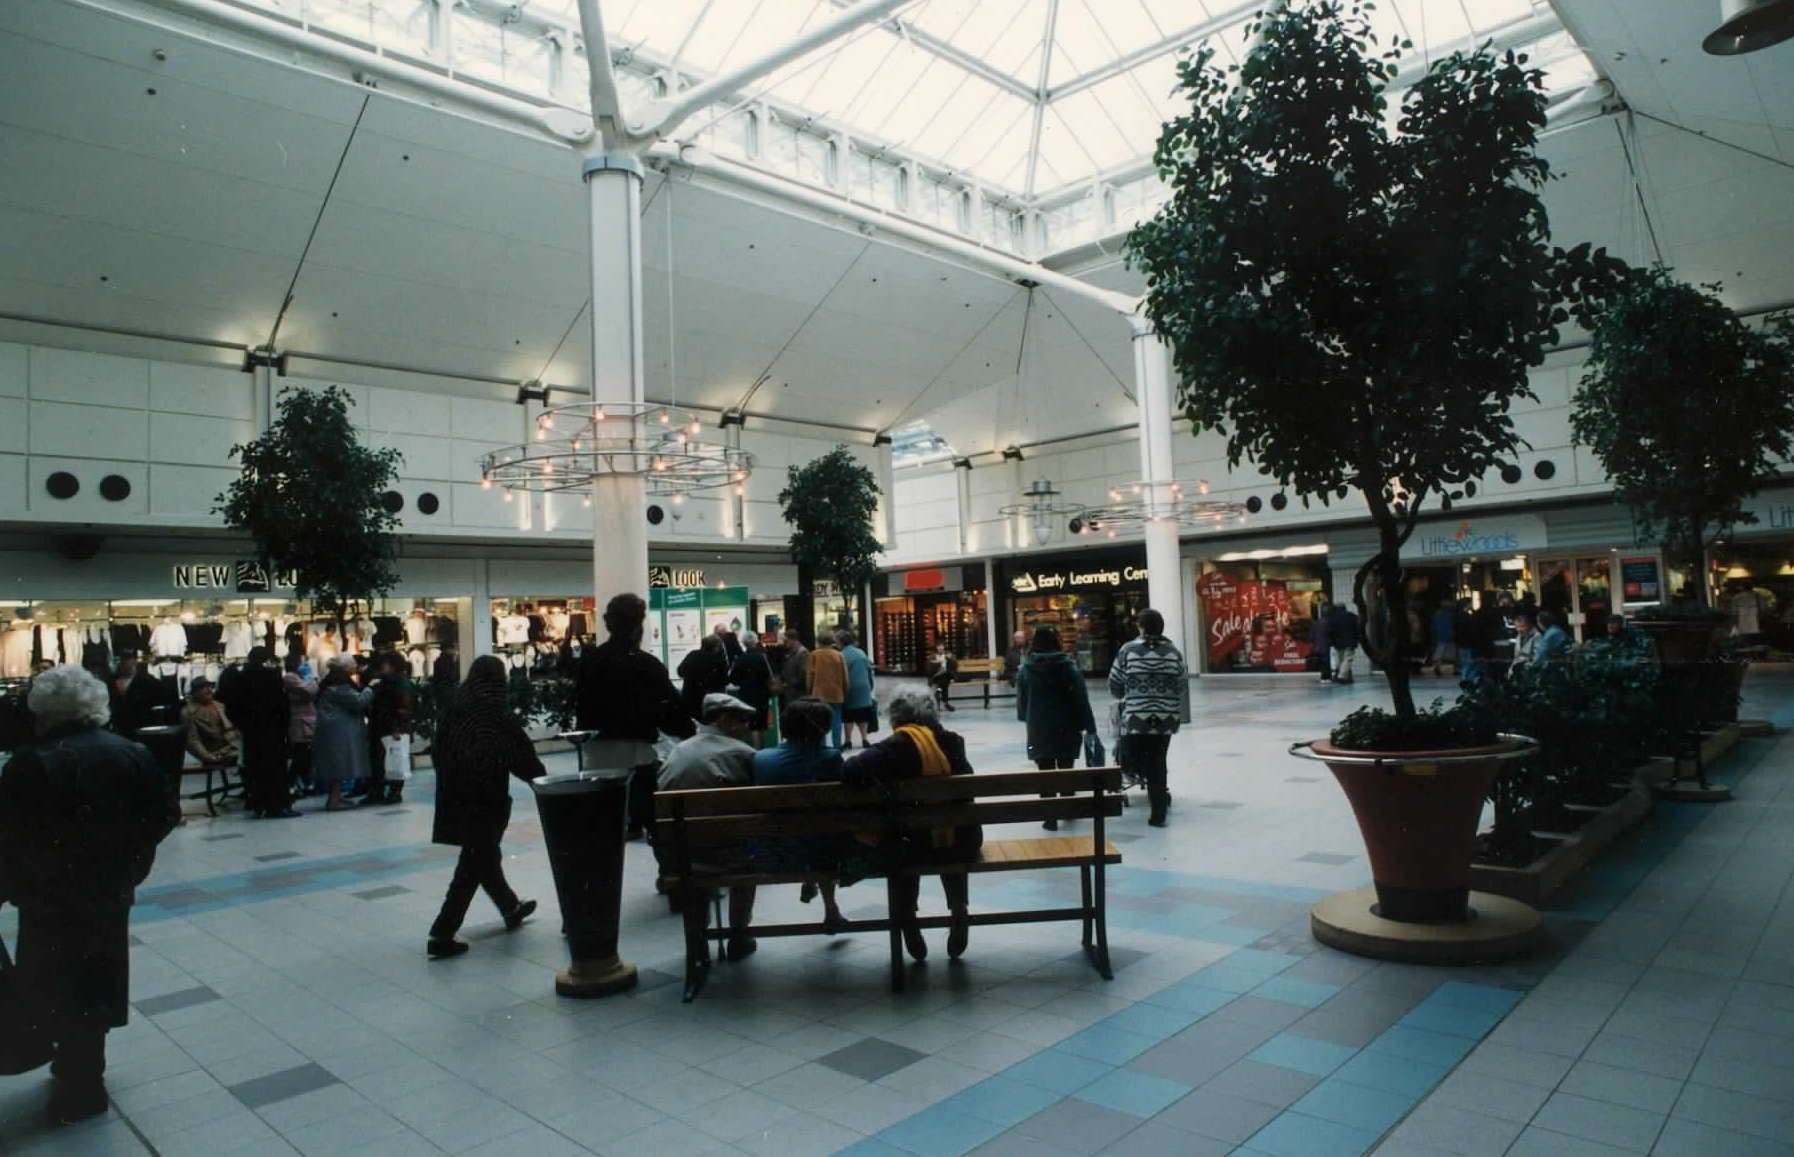 The main square in 1995, featuring New Look, Early Learning Centre and Littlewoods